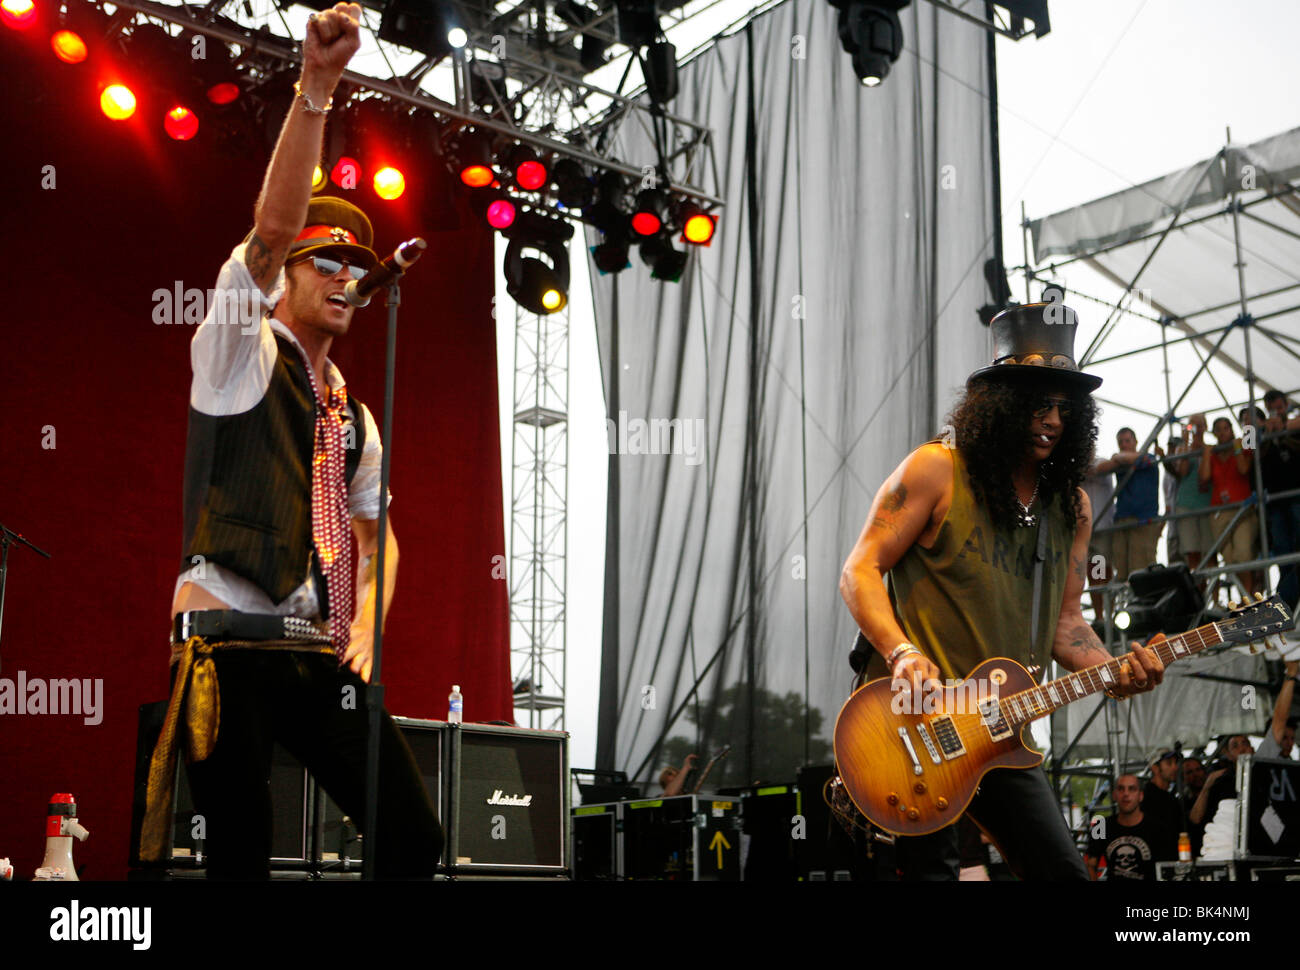 Scott Weiland and Slash of Velvet Revolver perform during a concert. Stock Photo